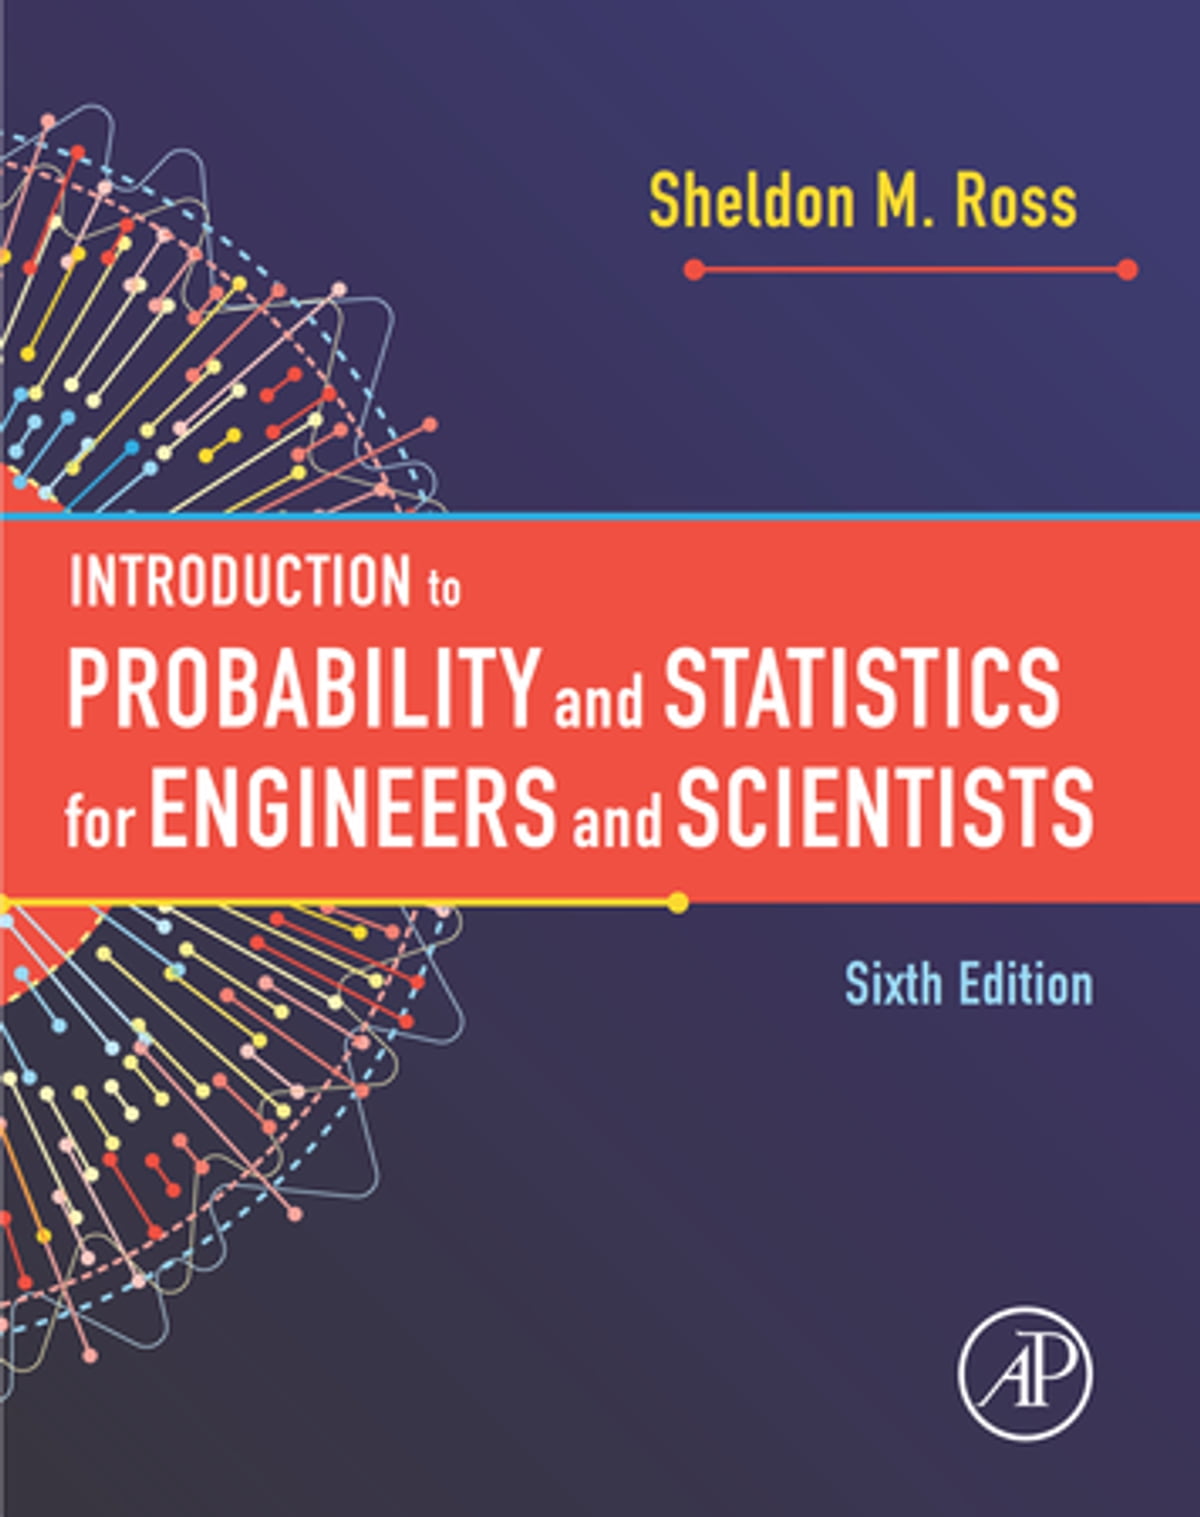 Ross-Introduction-Probability-Statistics-Engineers-Scientists-6th